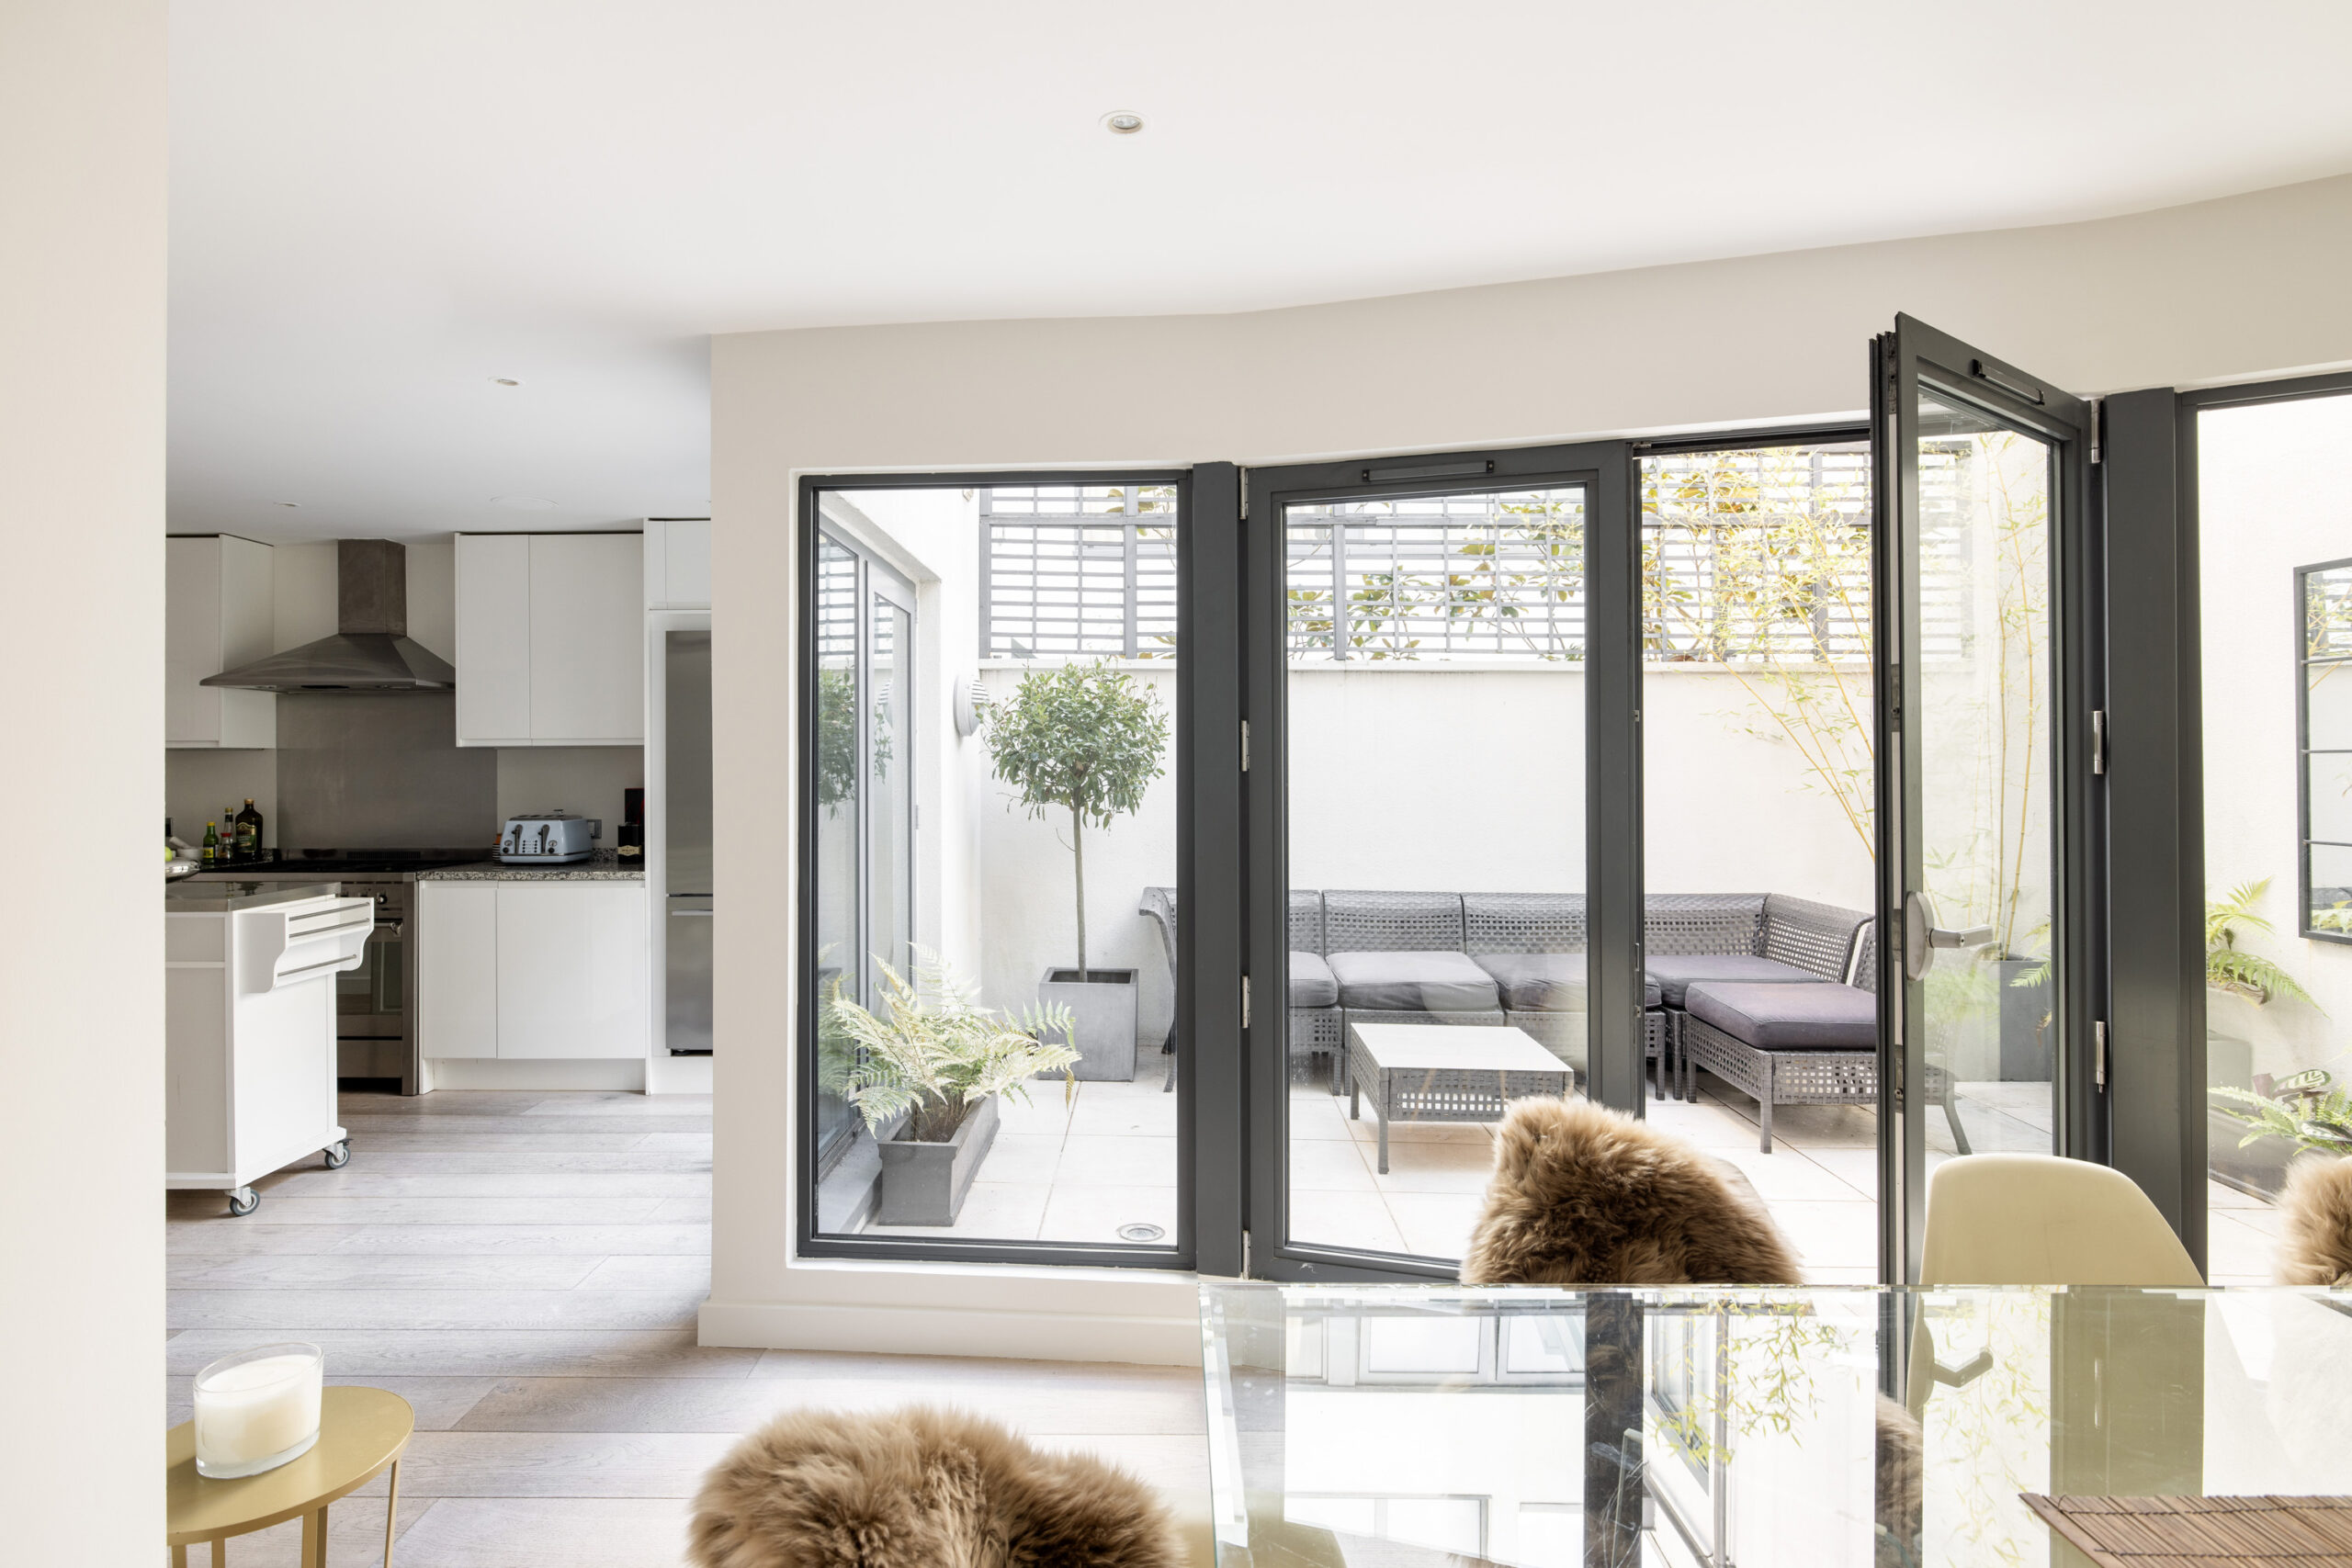 Kitchen and dining area with glass doors leading to a private garden of a three-bedroom mews house for sale in Notting Hill